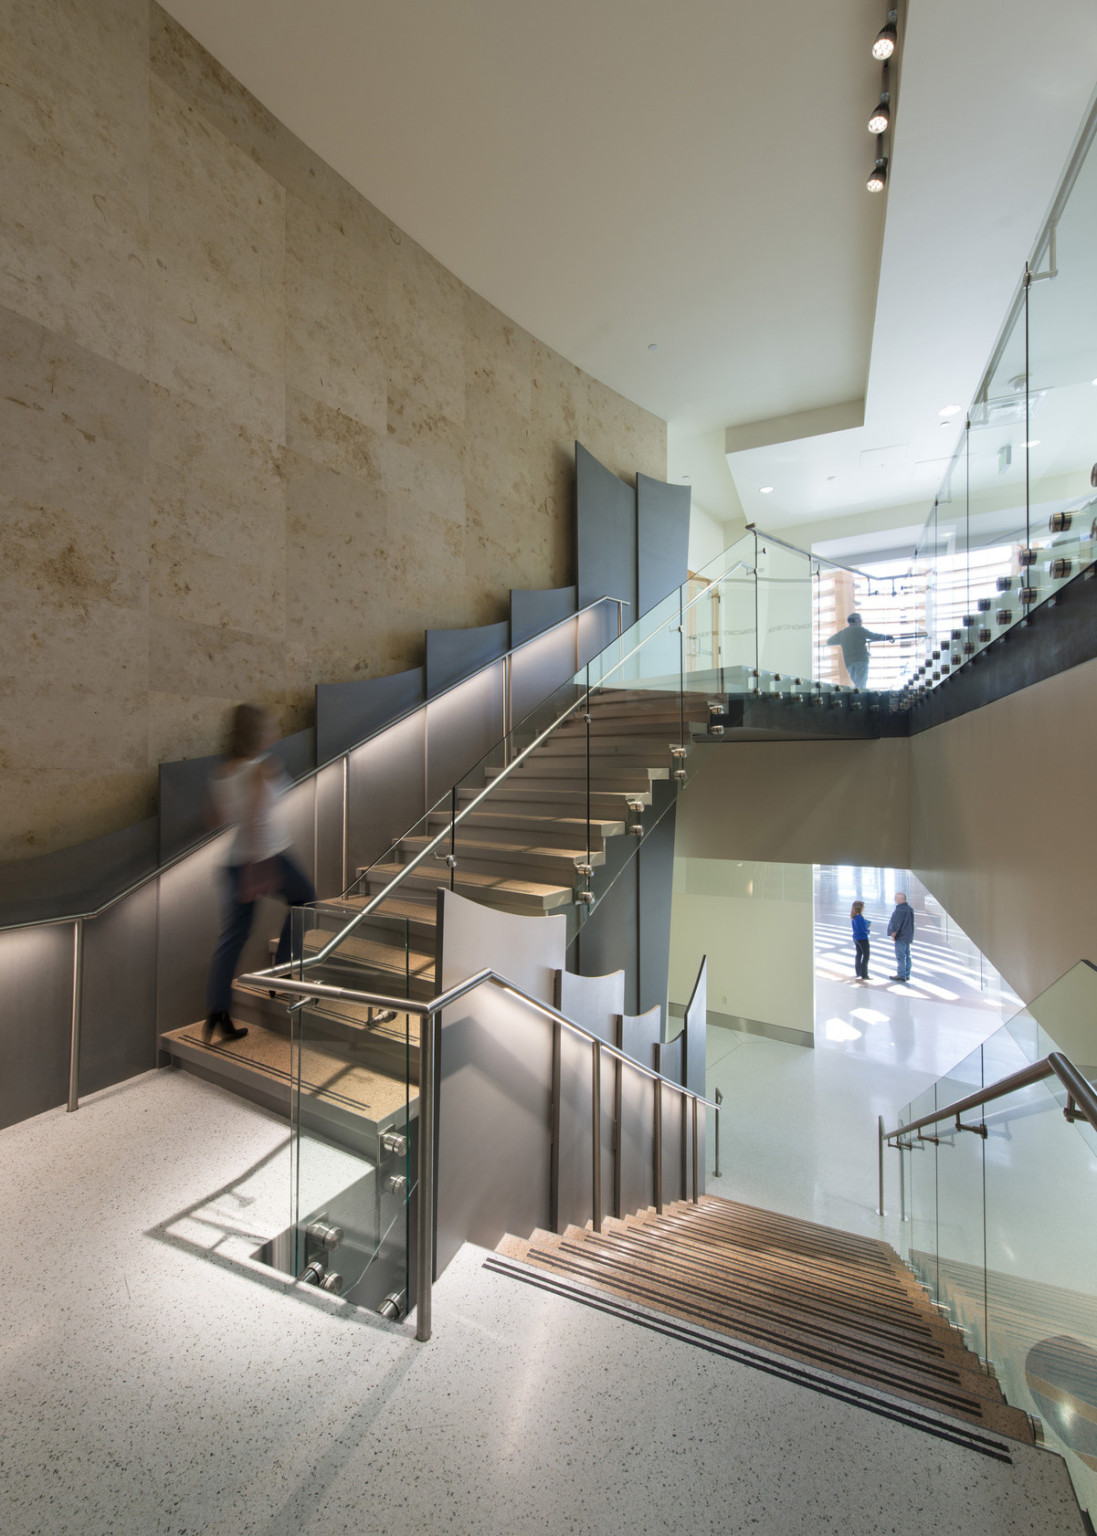 A stairwell between 2 white hallways with natural lighting. Curved grey panels line the left wall past the glass rail